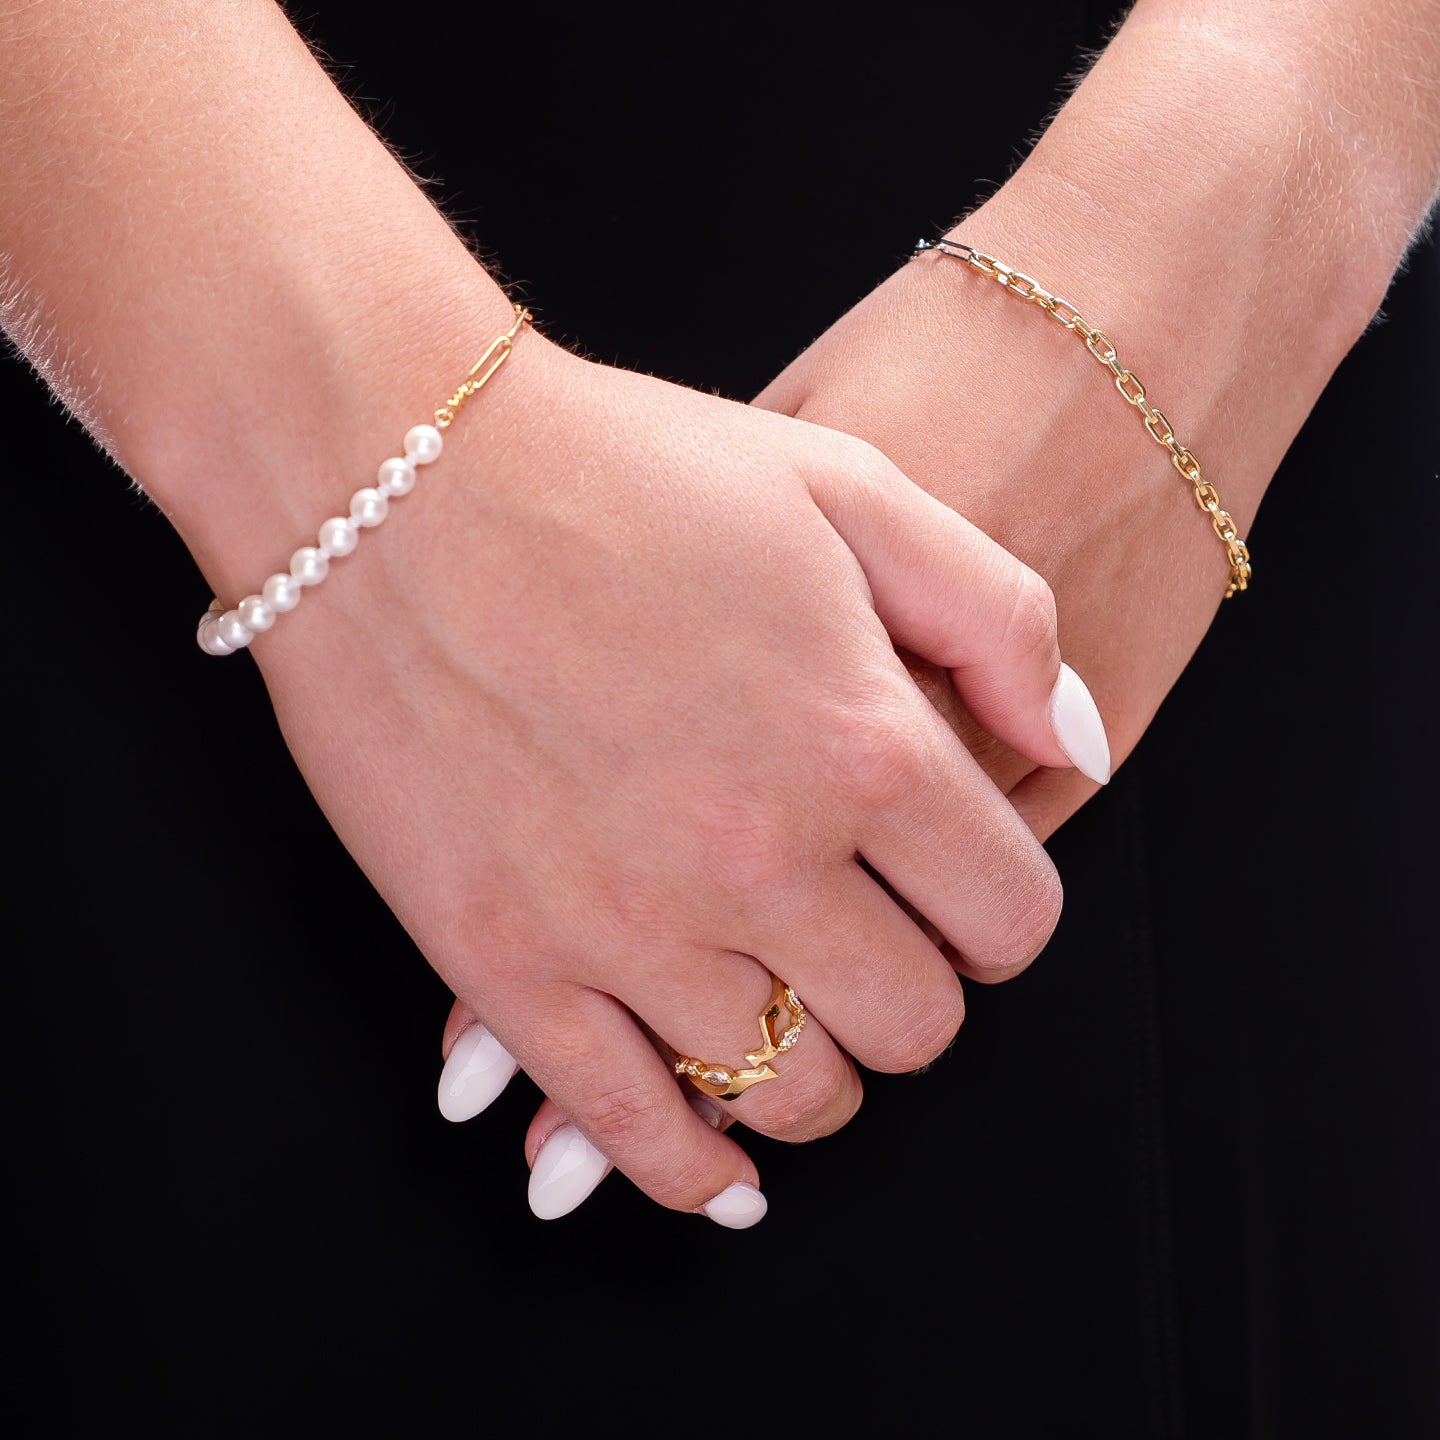 MIlamore Classic Pearl Duo Chain Bracelet